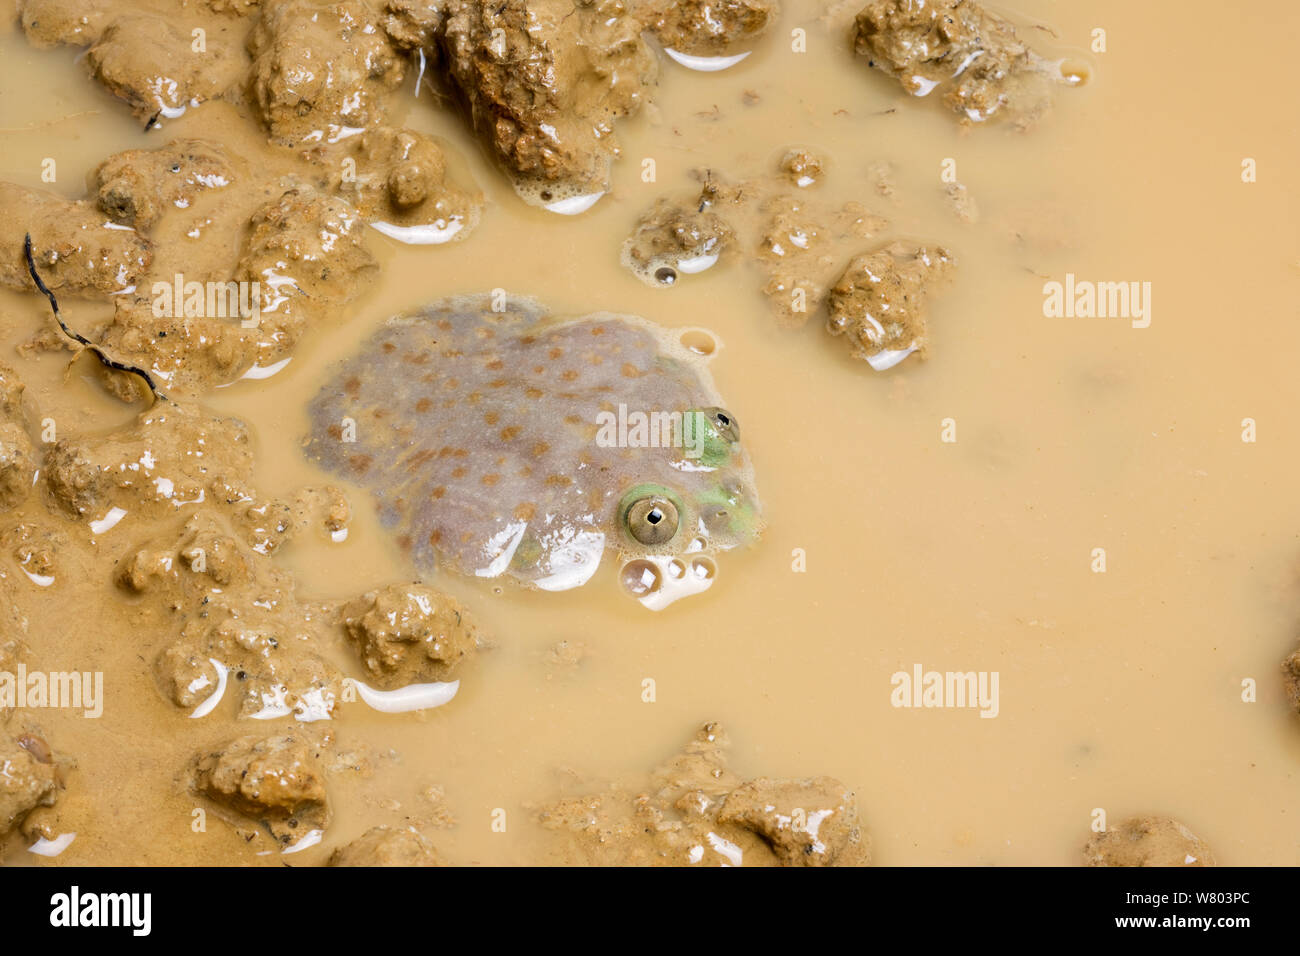 Budgett&#39;s Frog (Lepidobatrachus laevis) mostly submerged in muddy water, with eyes visible above water, captive, occurs in South America. Stock Photo